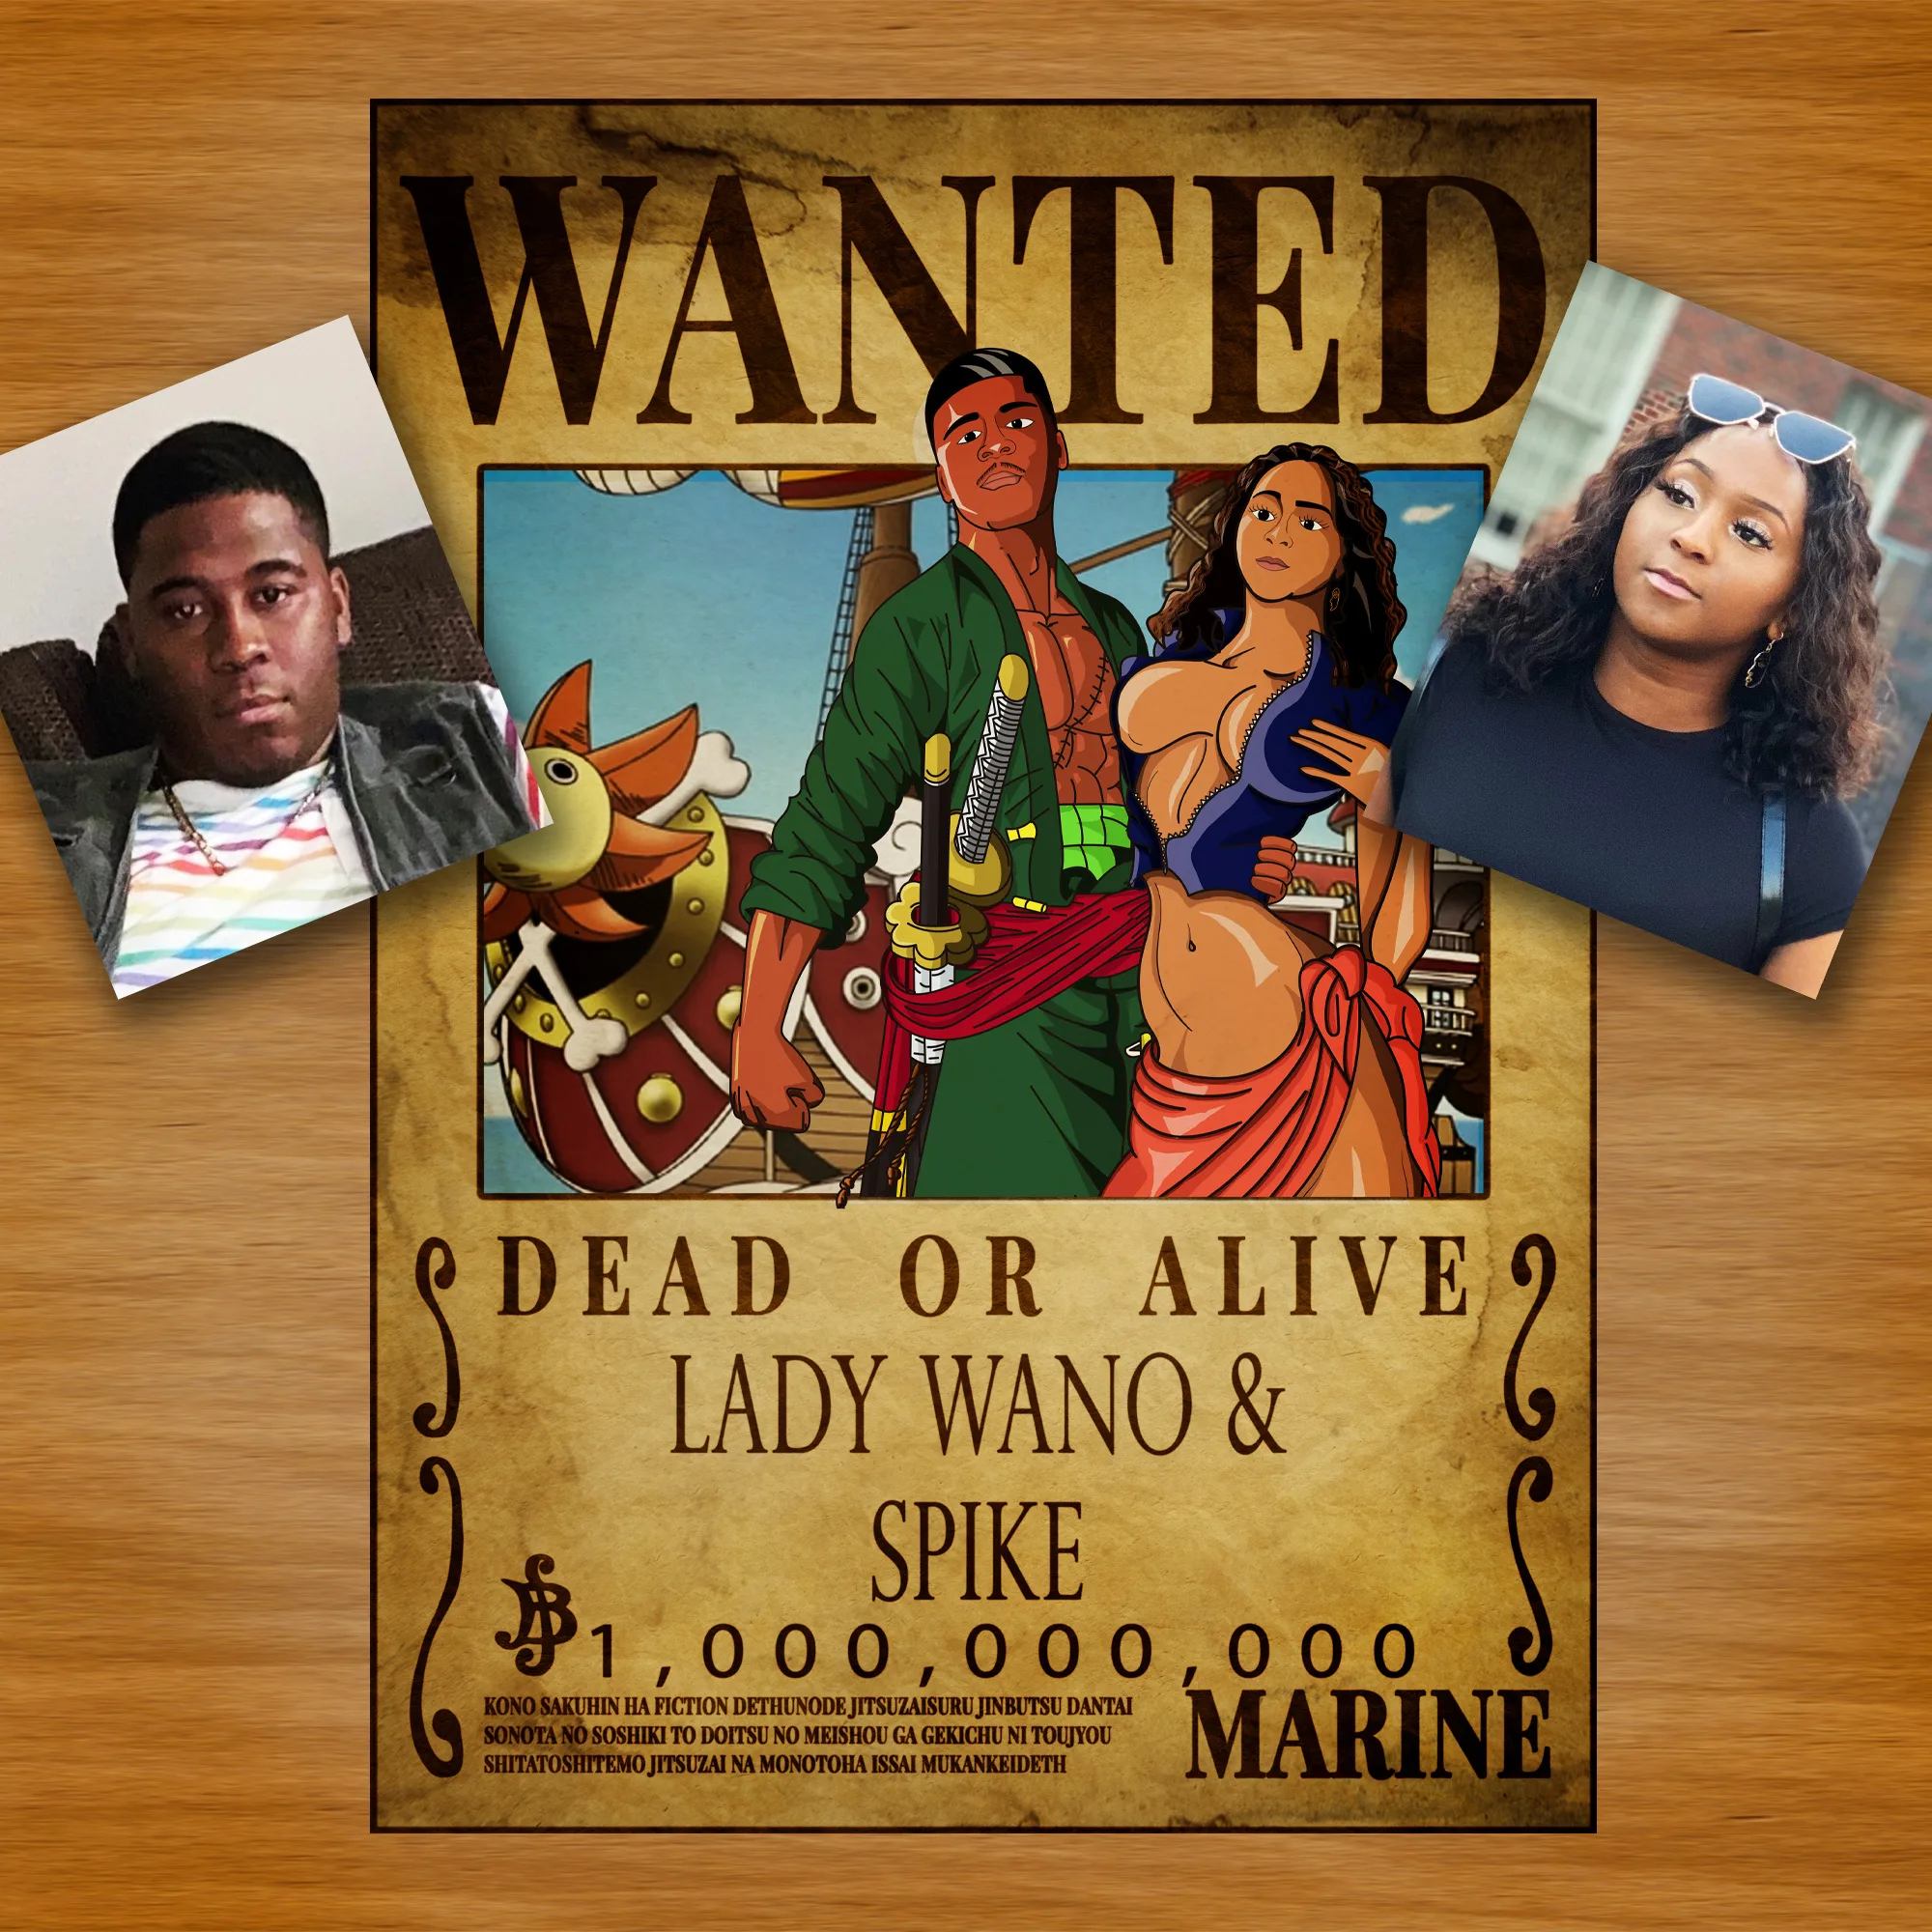 Custom One Piece Wanted Poster from photo  Custom Pirate Wanted Poster -  Utoon Custom Portraits From Photos